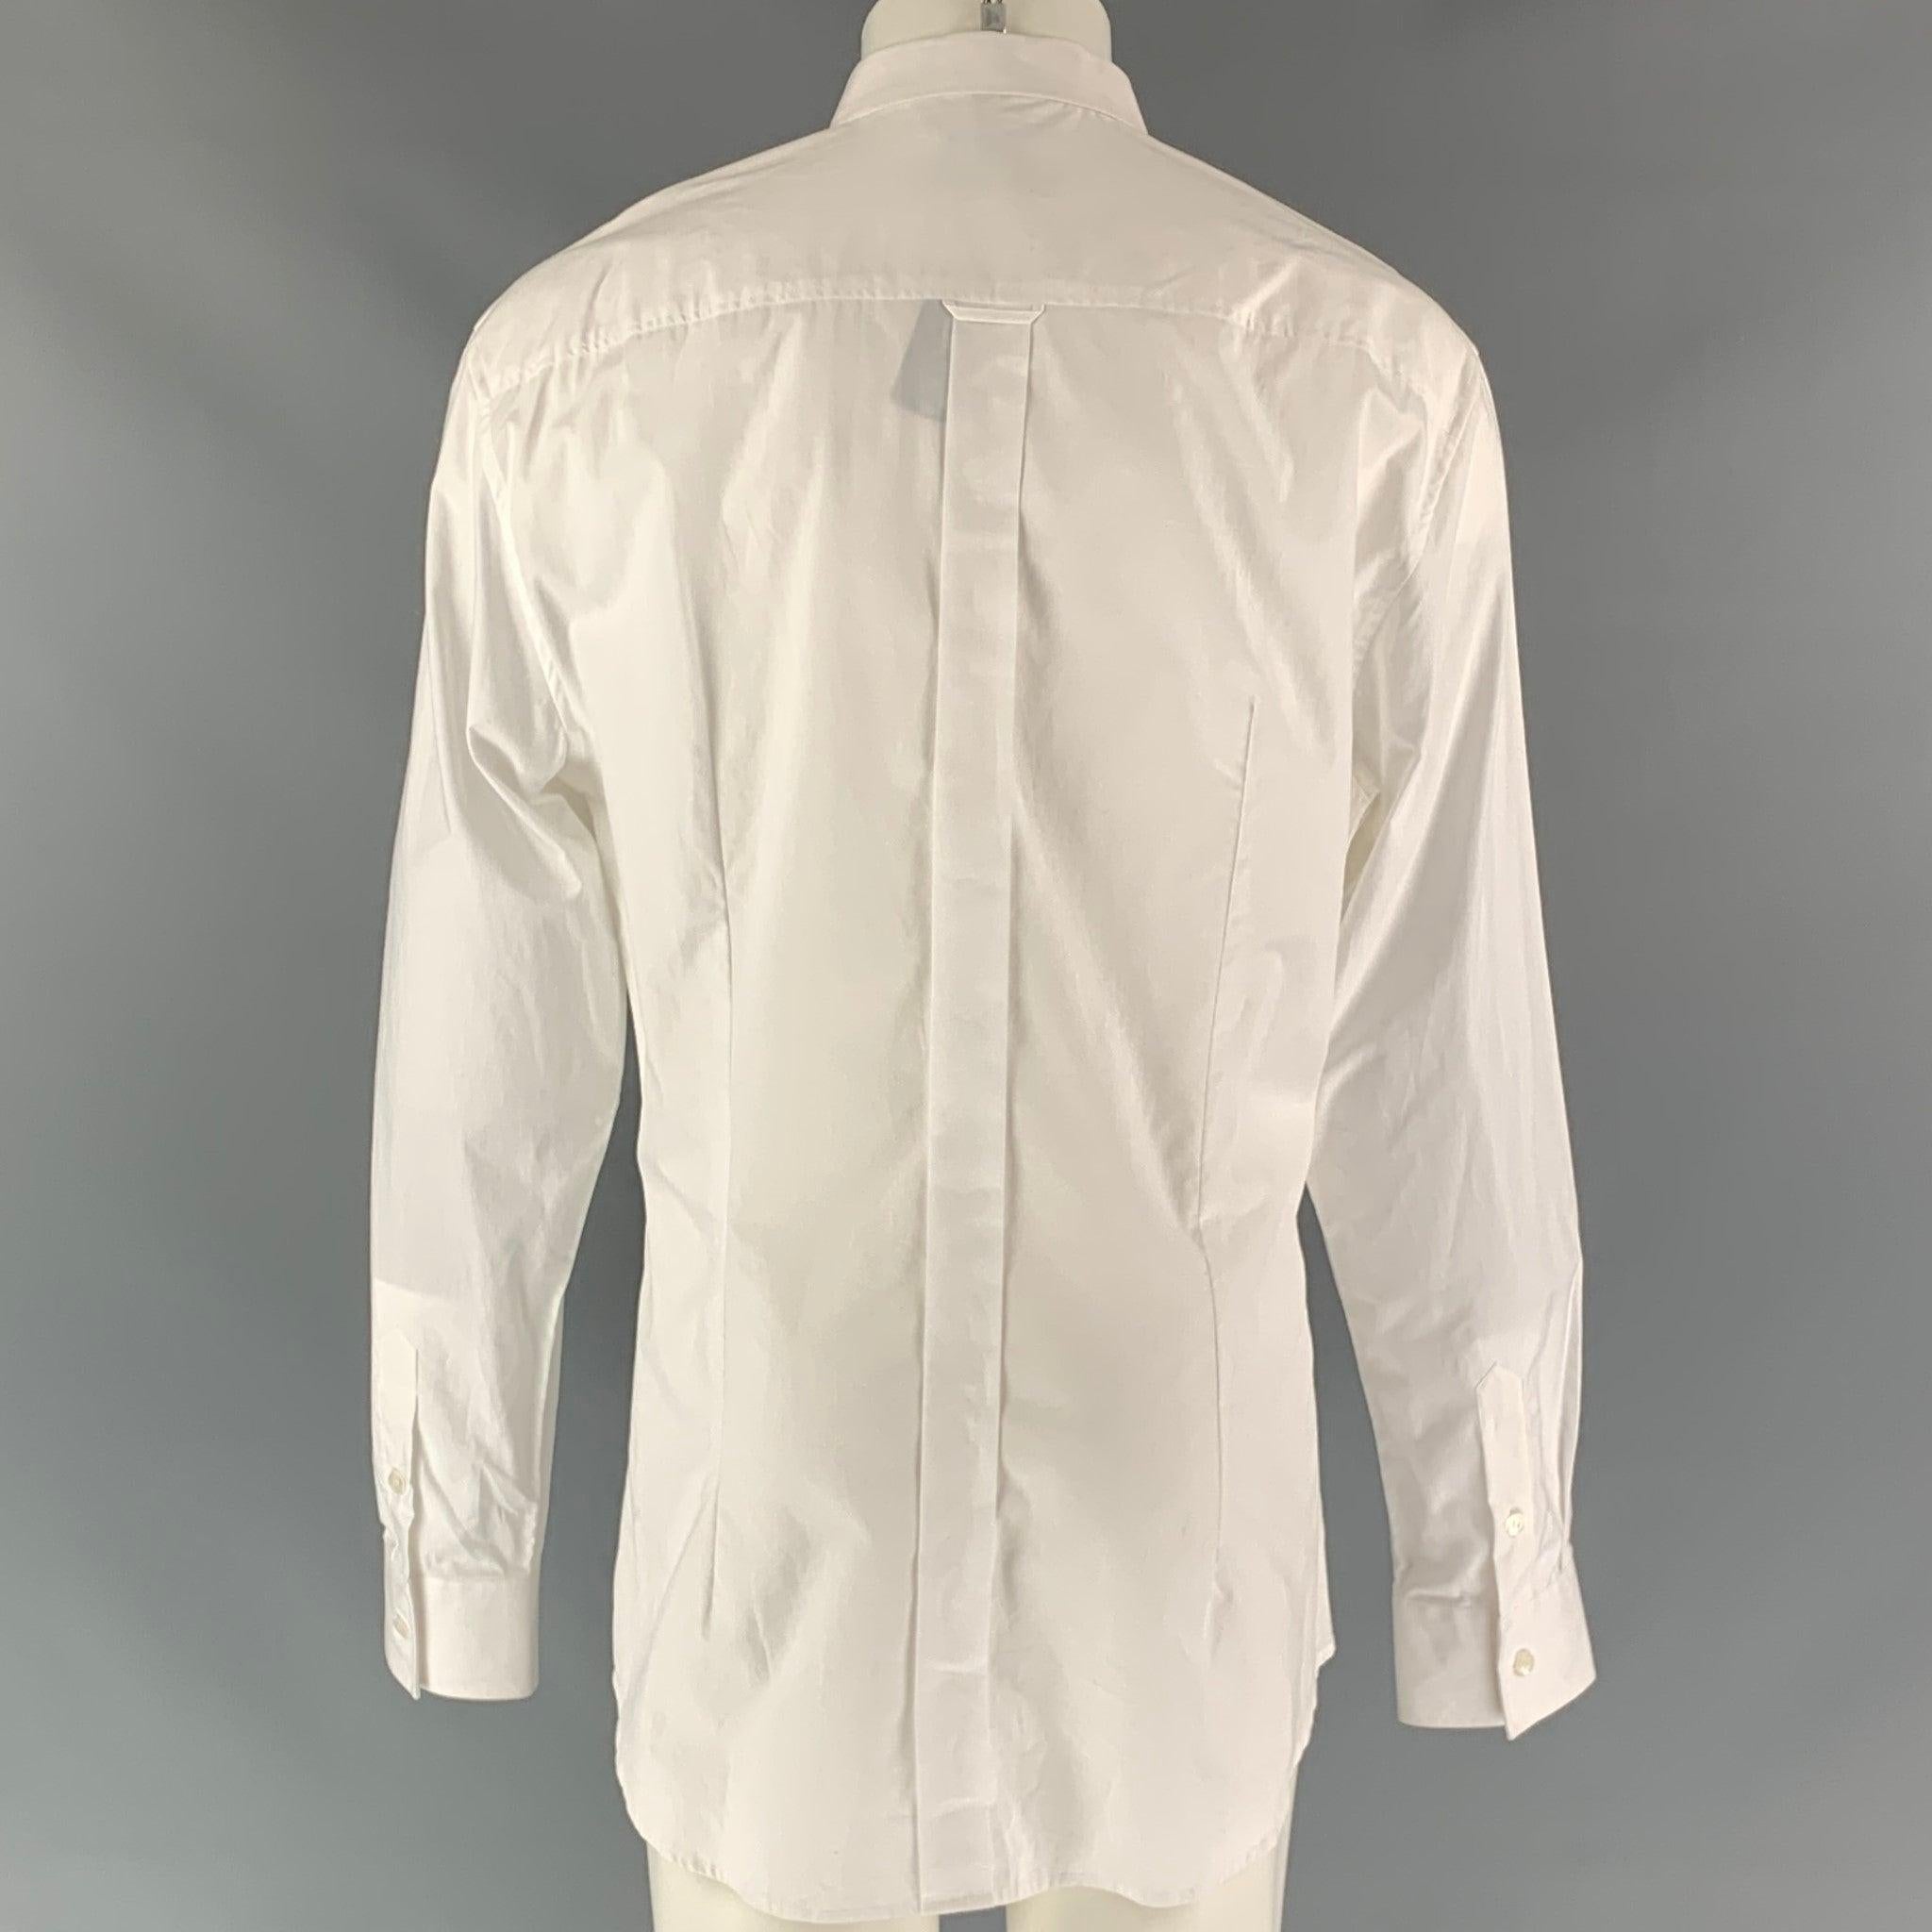 D&G DOLCE & GABBANA long sleeve dress shirt comes in white cotton fabric, button up closure, straight point collar and one button square sleeve cuff features patch pockets.
New with Tags. 

Marked:   48
 

Measurements: 
  
Shoulder: 21 inChest: 48